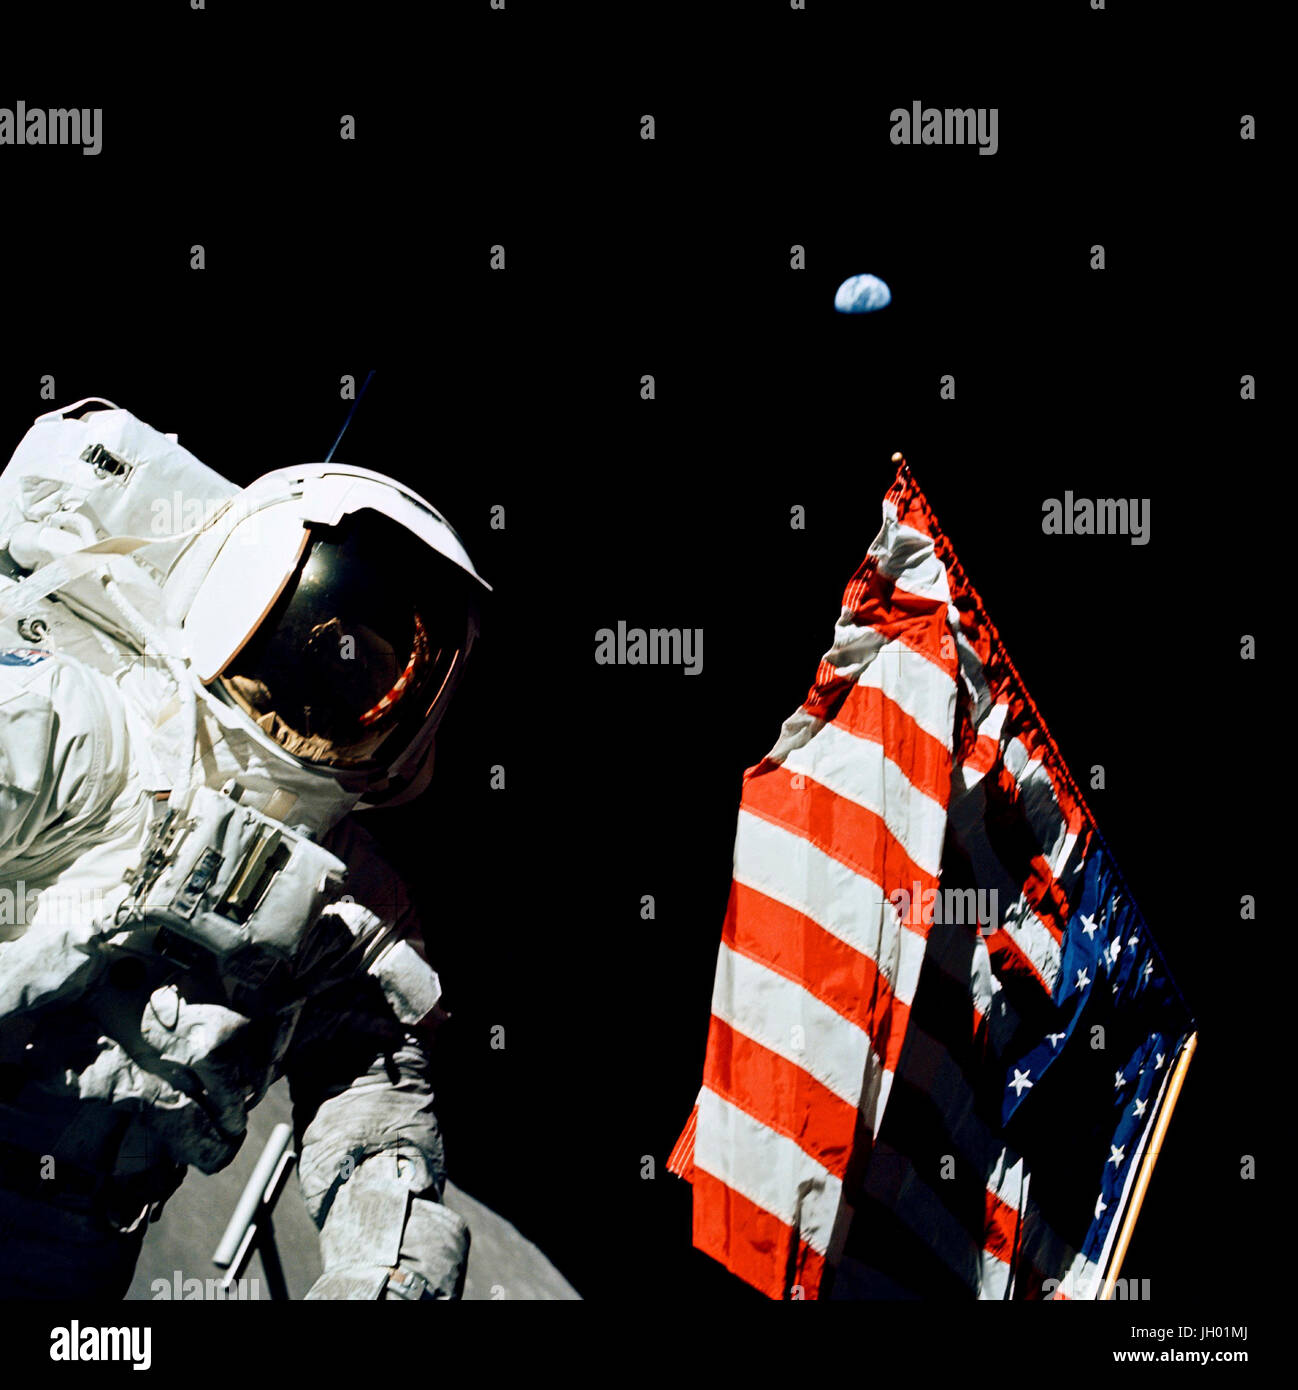 Astronaut Harrison H. Schmitt stands by the American flag during a moonwalk on the Apollo 17 mission. Earth - seen above the flag- is a quarter-million miles away. Schmitt, Gene Cernan and Ron Evans made the Apollo program's final journey to the moon in December 1972. Photo Credit: NASA Stock Photo